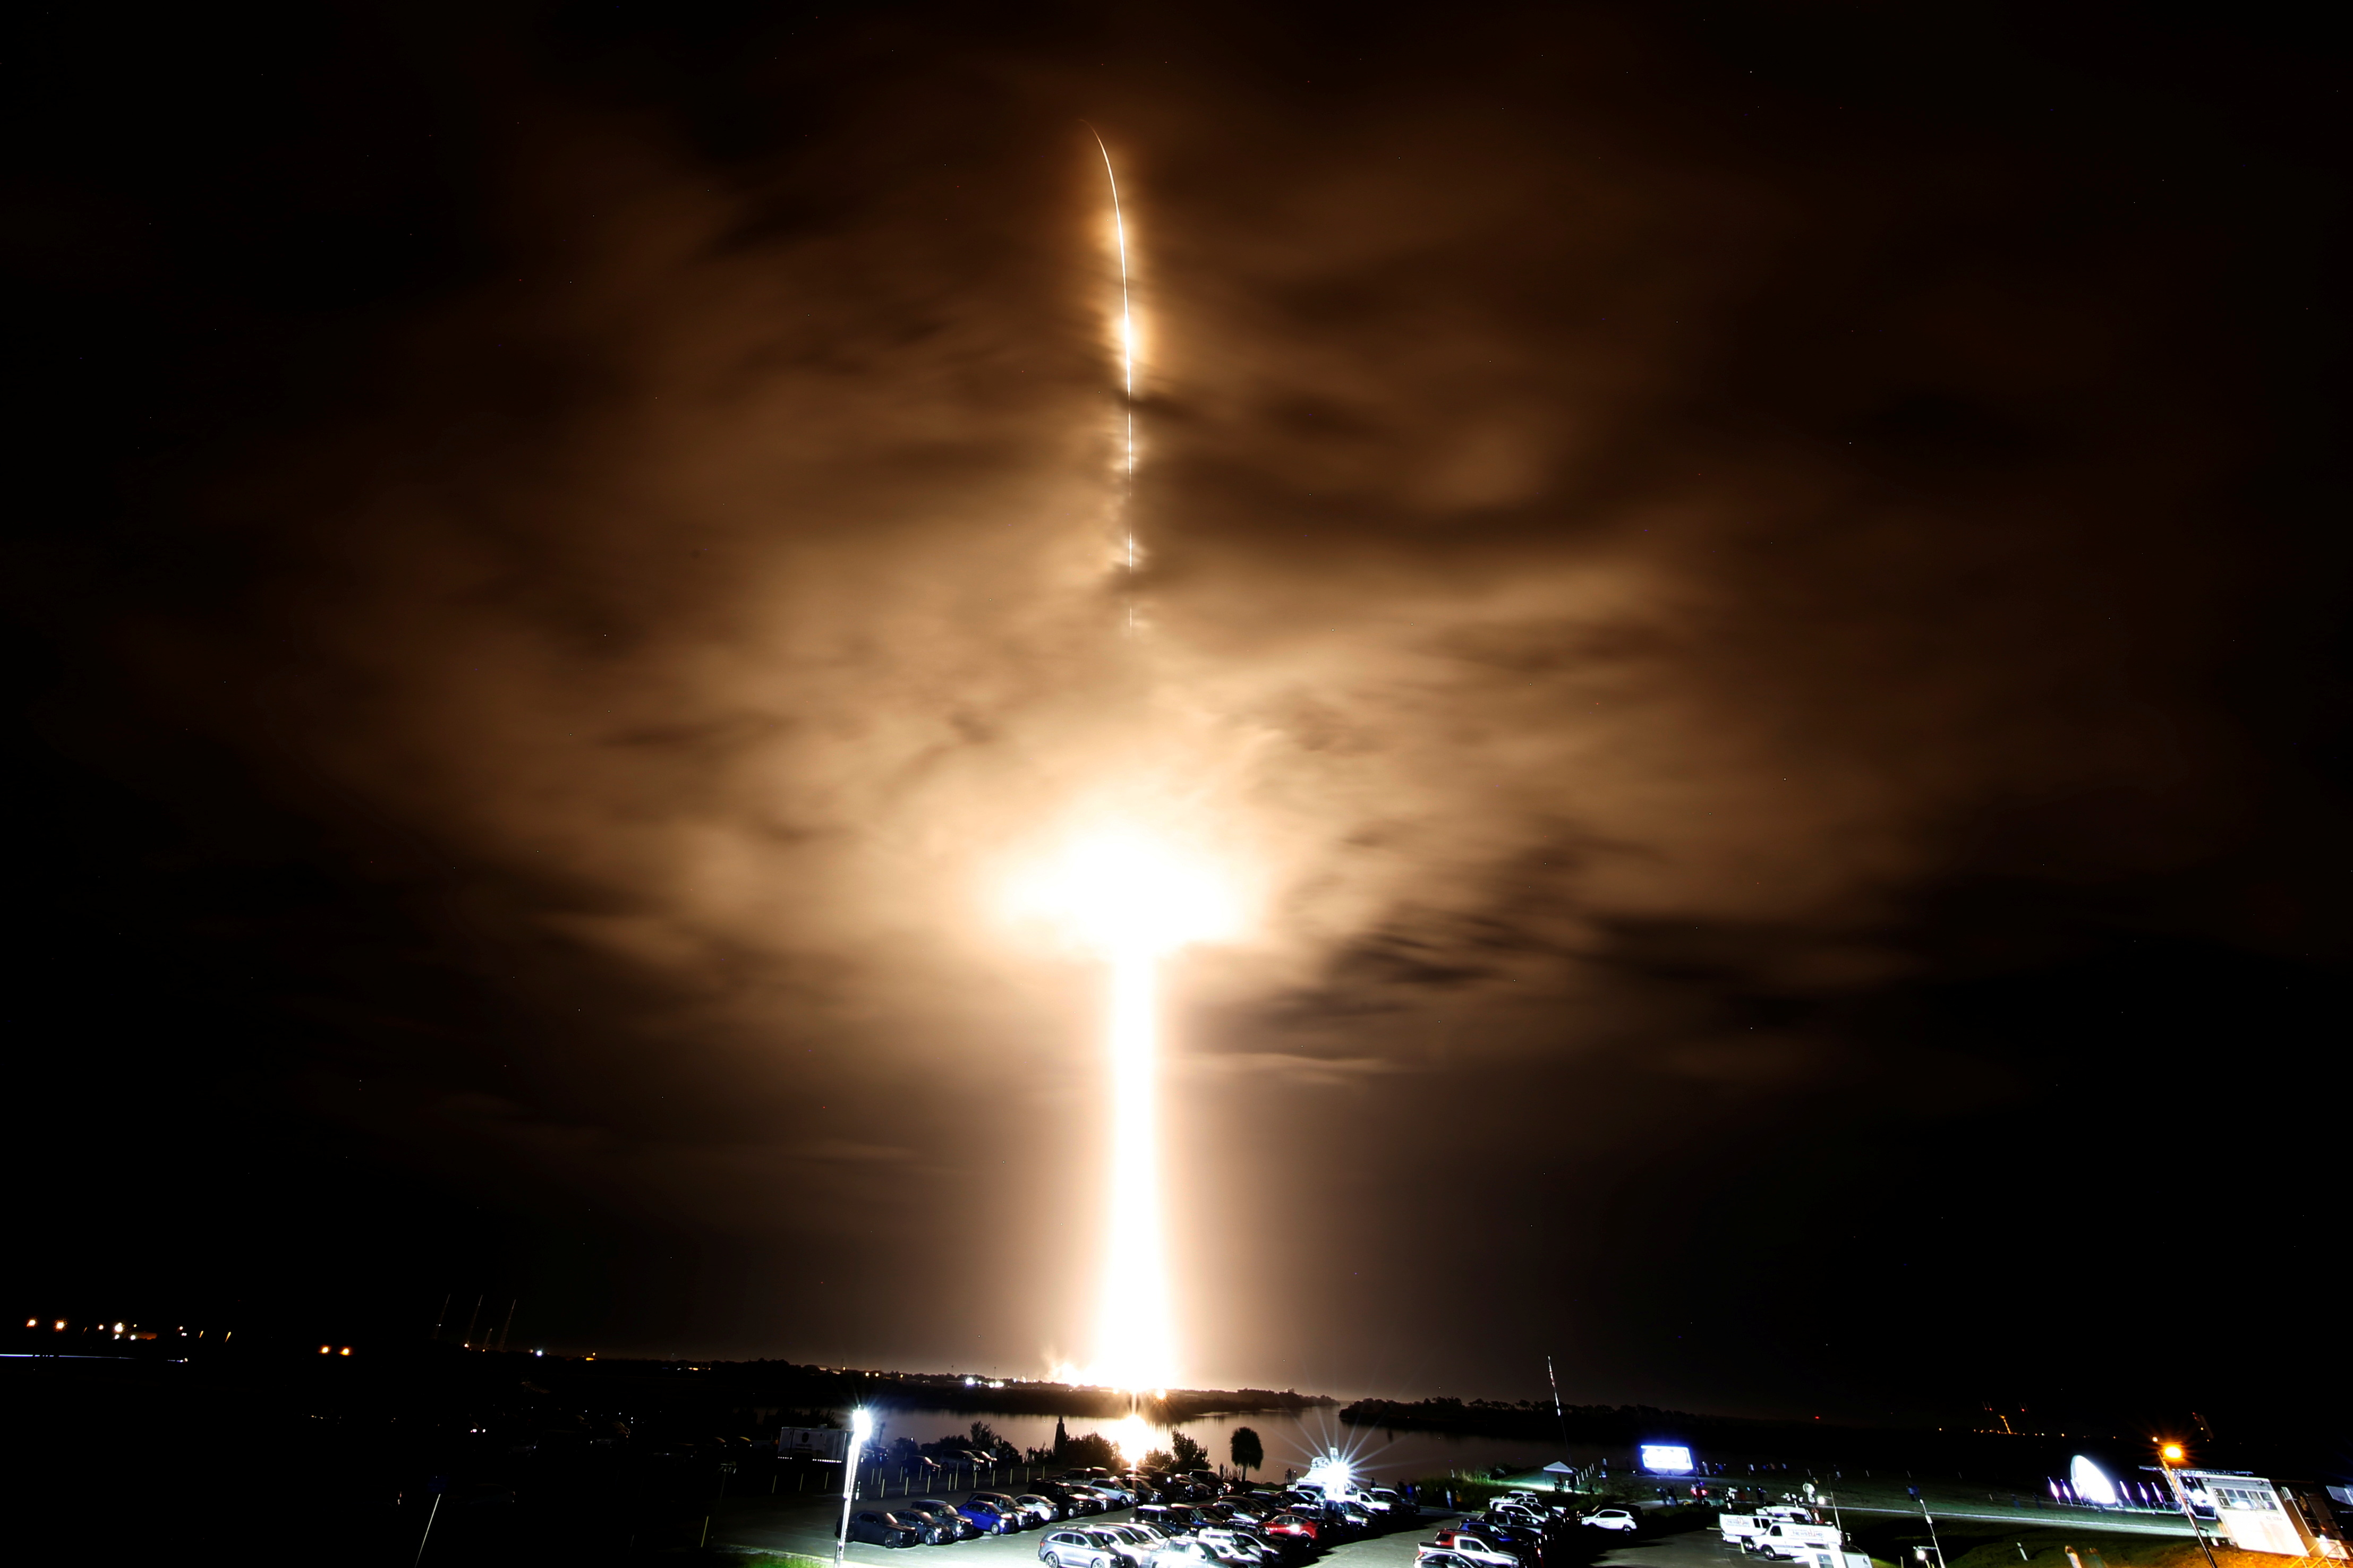 A SpaceX Falcon 9 rocket, with the Crew Dragon capsule, is launched carrying three NASA and one ESA astronauts on a mission to the International Space Station at the Kennedy Space Center in Cape Canaveral, Florida, U.S. November 10, 2021. REUTERS/Joe Skipper/File Photo